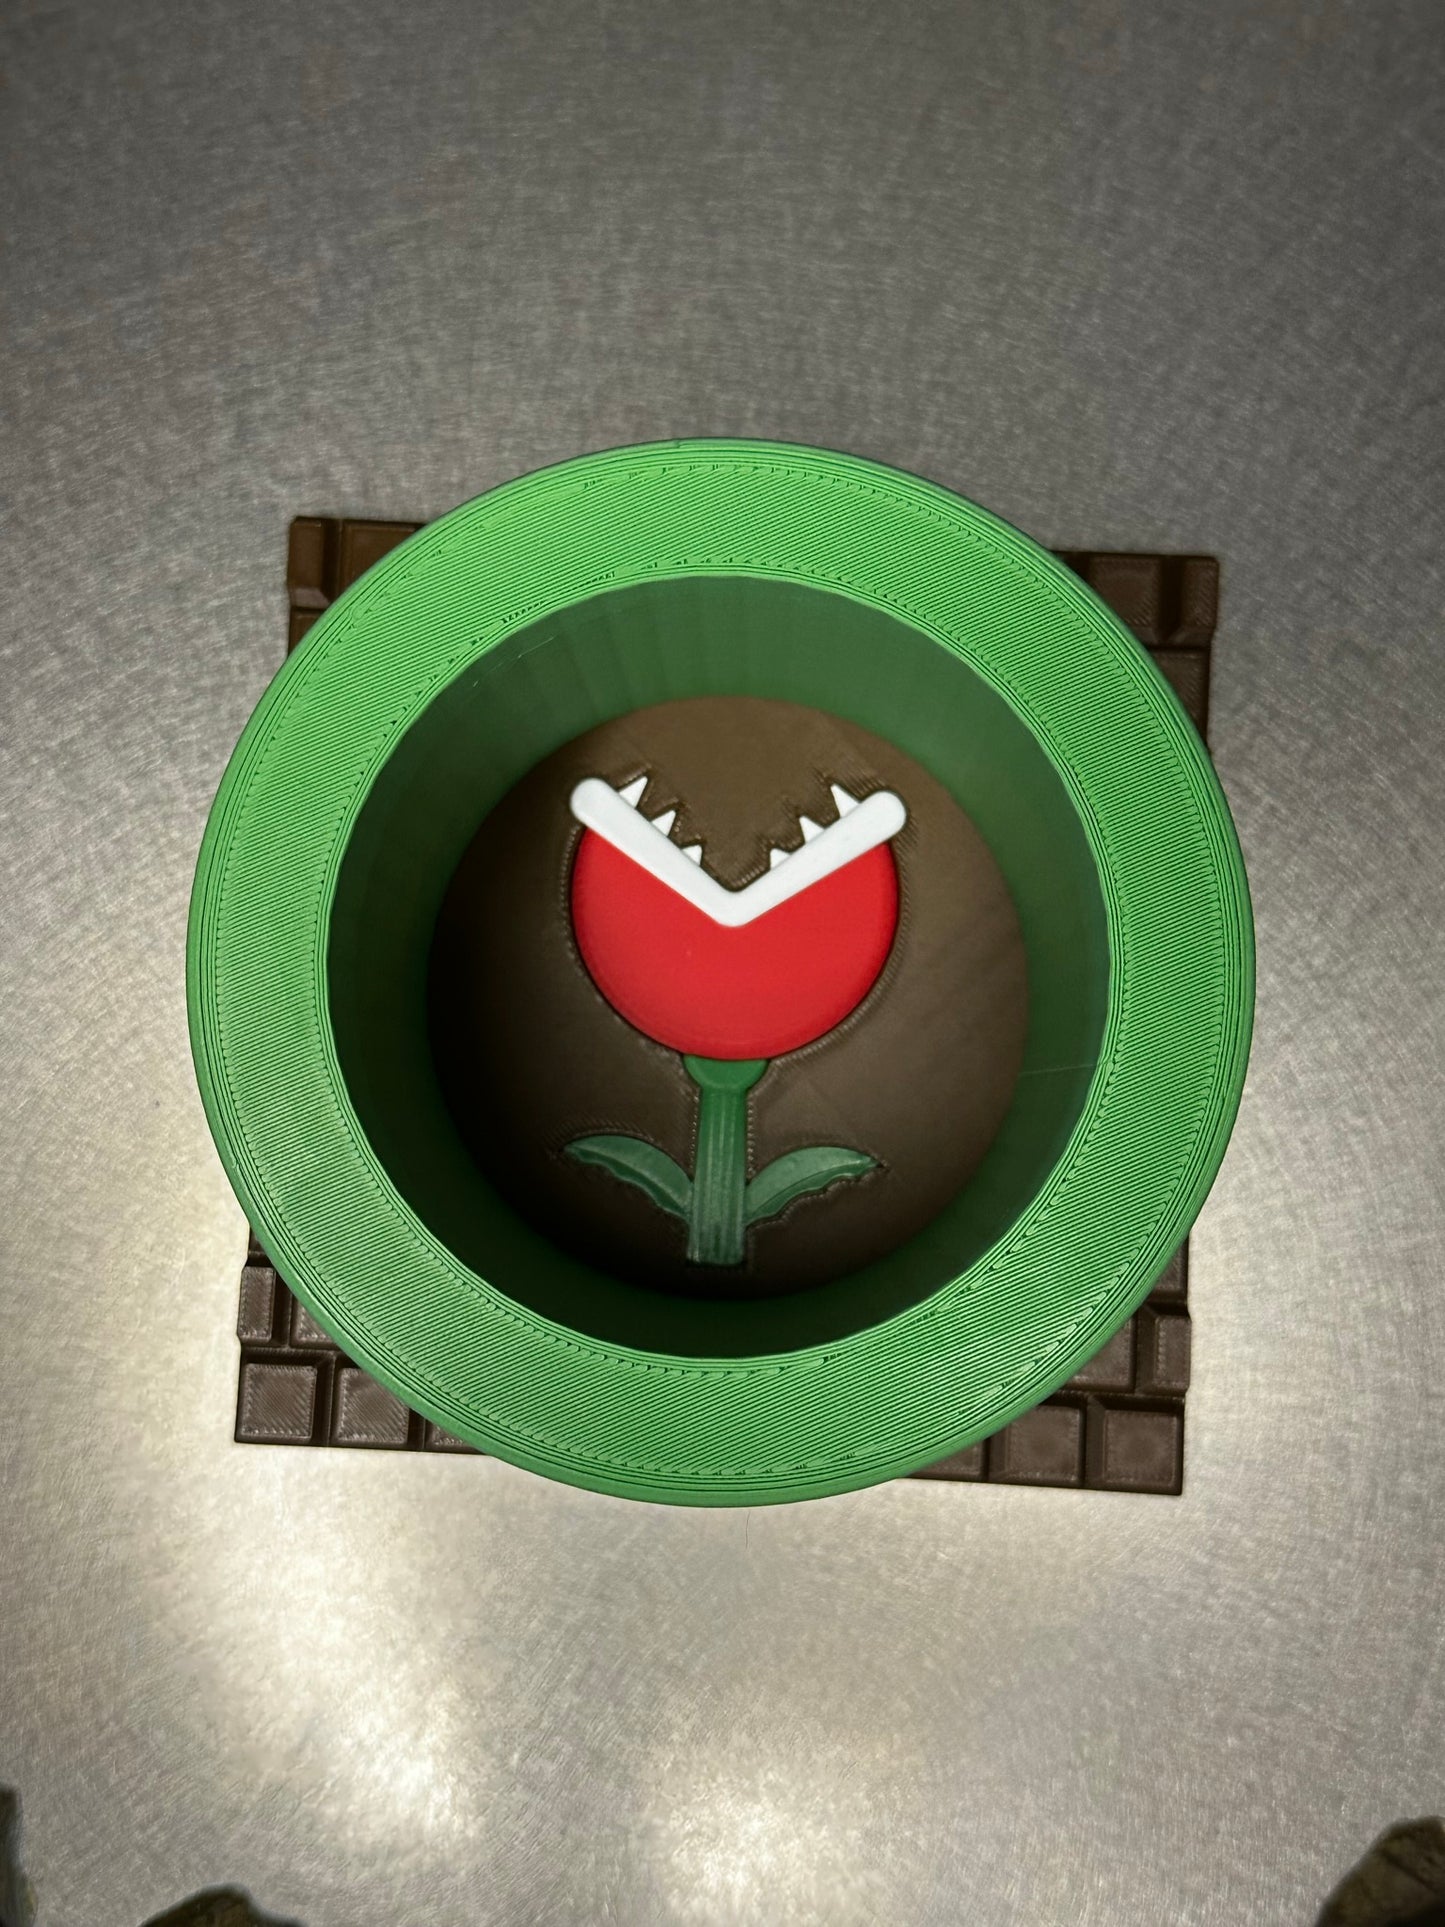 Super Mario Brothers Green Pipe Giant Cup Holder/Coaster - Handmade Drink Holder Inspired by the Iconic Game